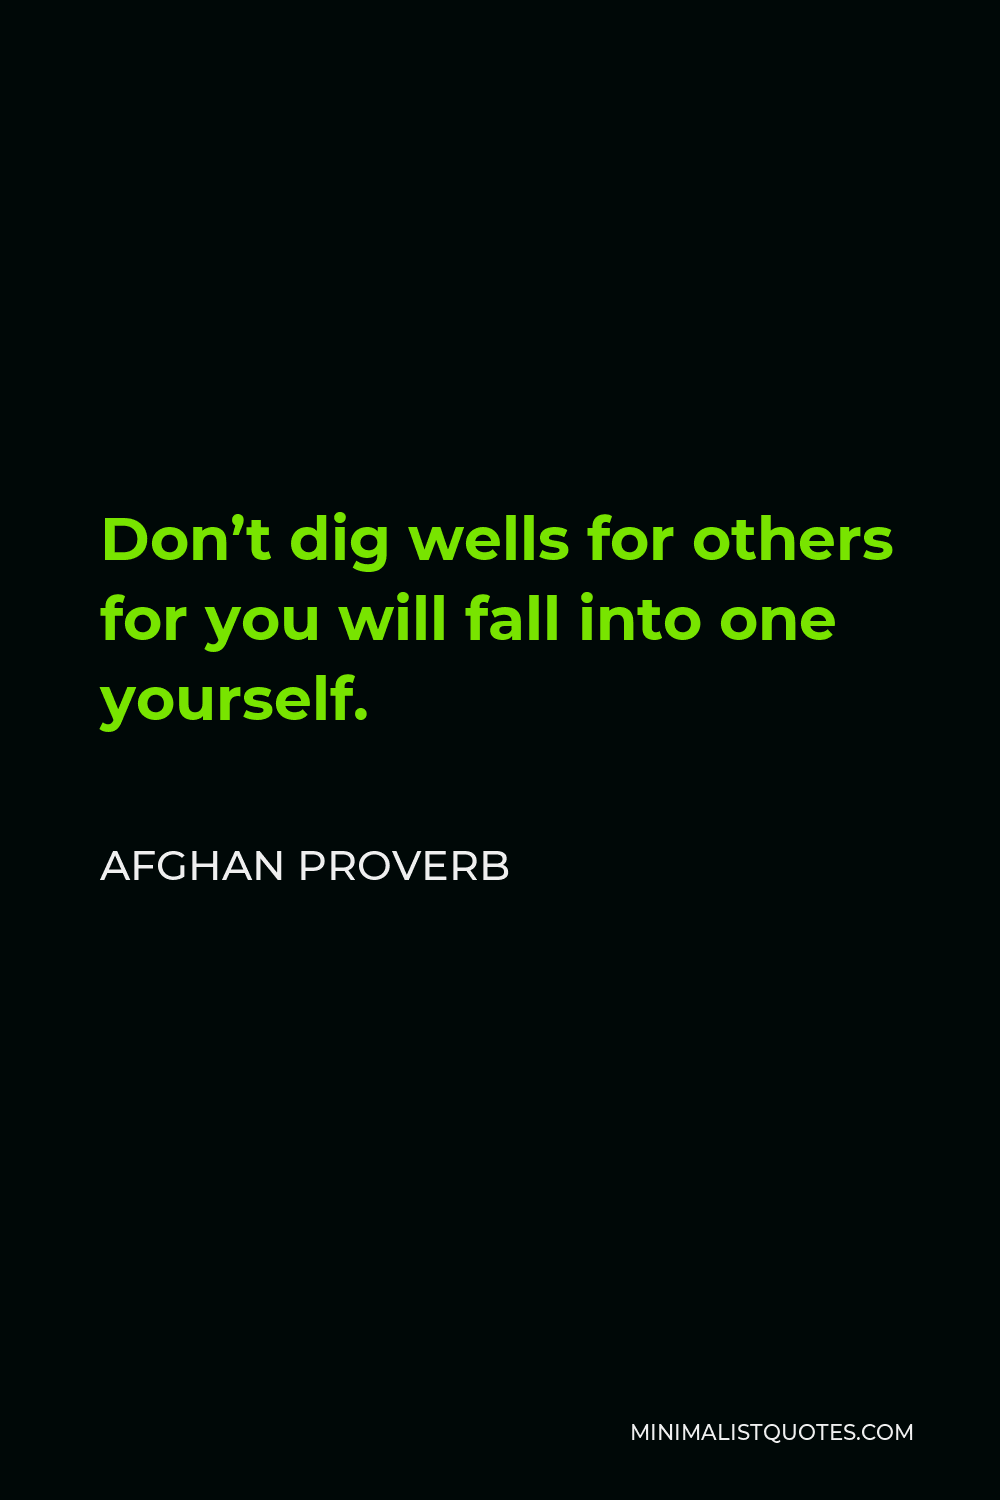 Afghan Proverb Quote - Don’t dig wells for others for you will fall into one yourself.